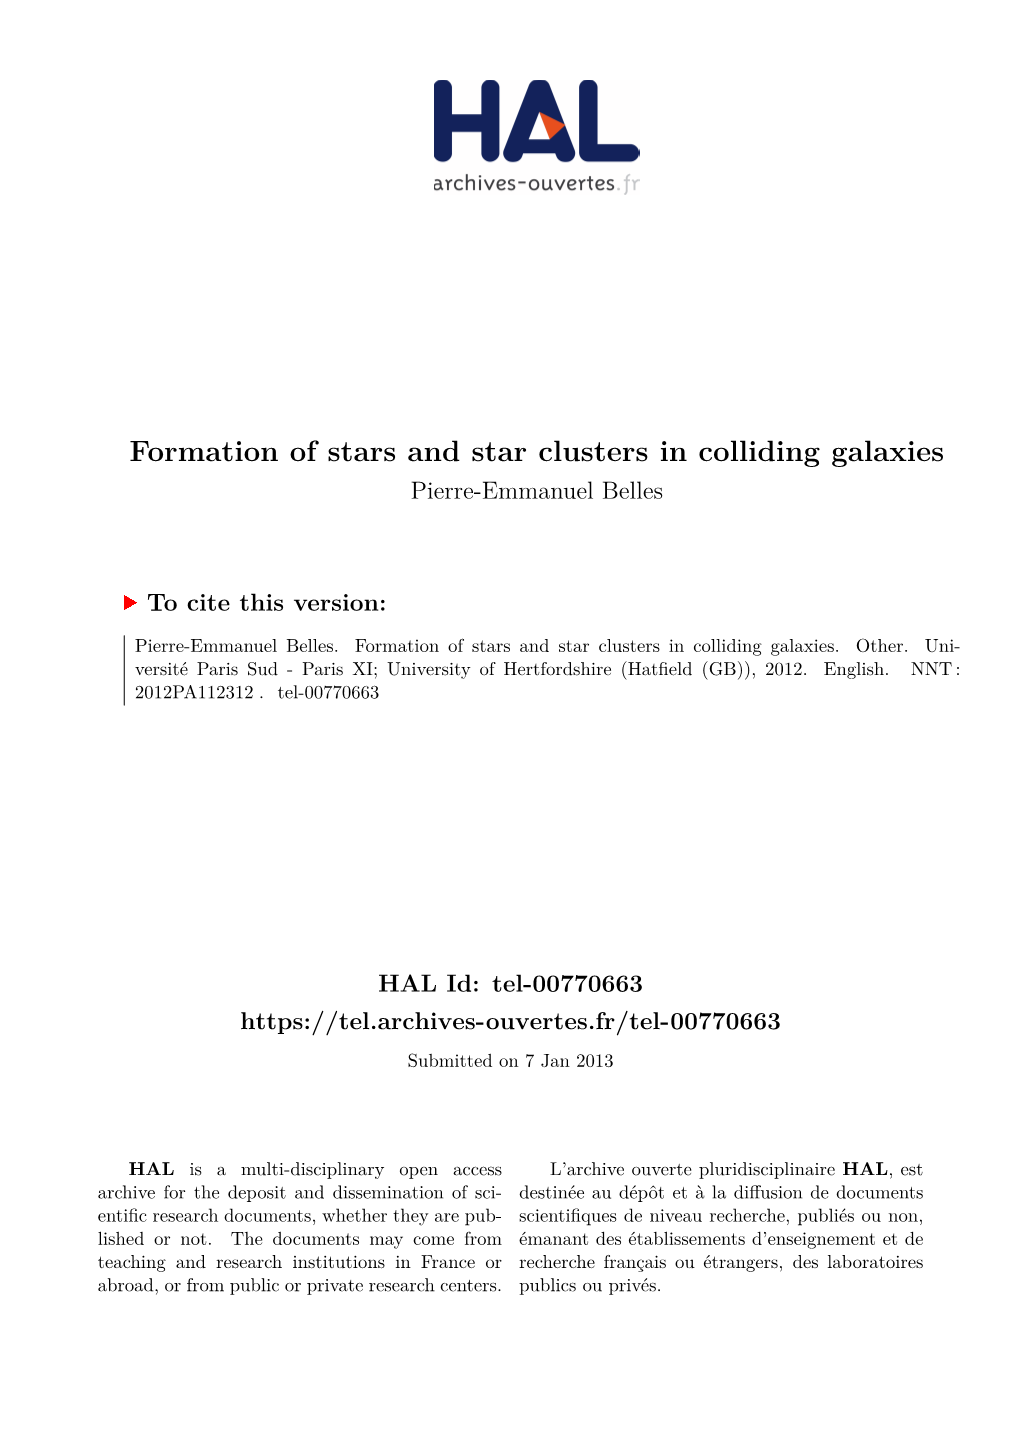 Formation of Stars and Star Clusters in Colliding Galaxies Pierre-Emmanuel Belles